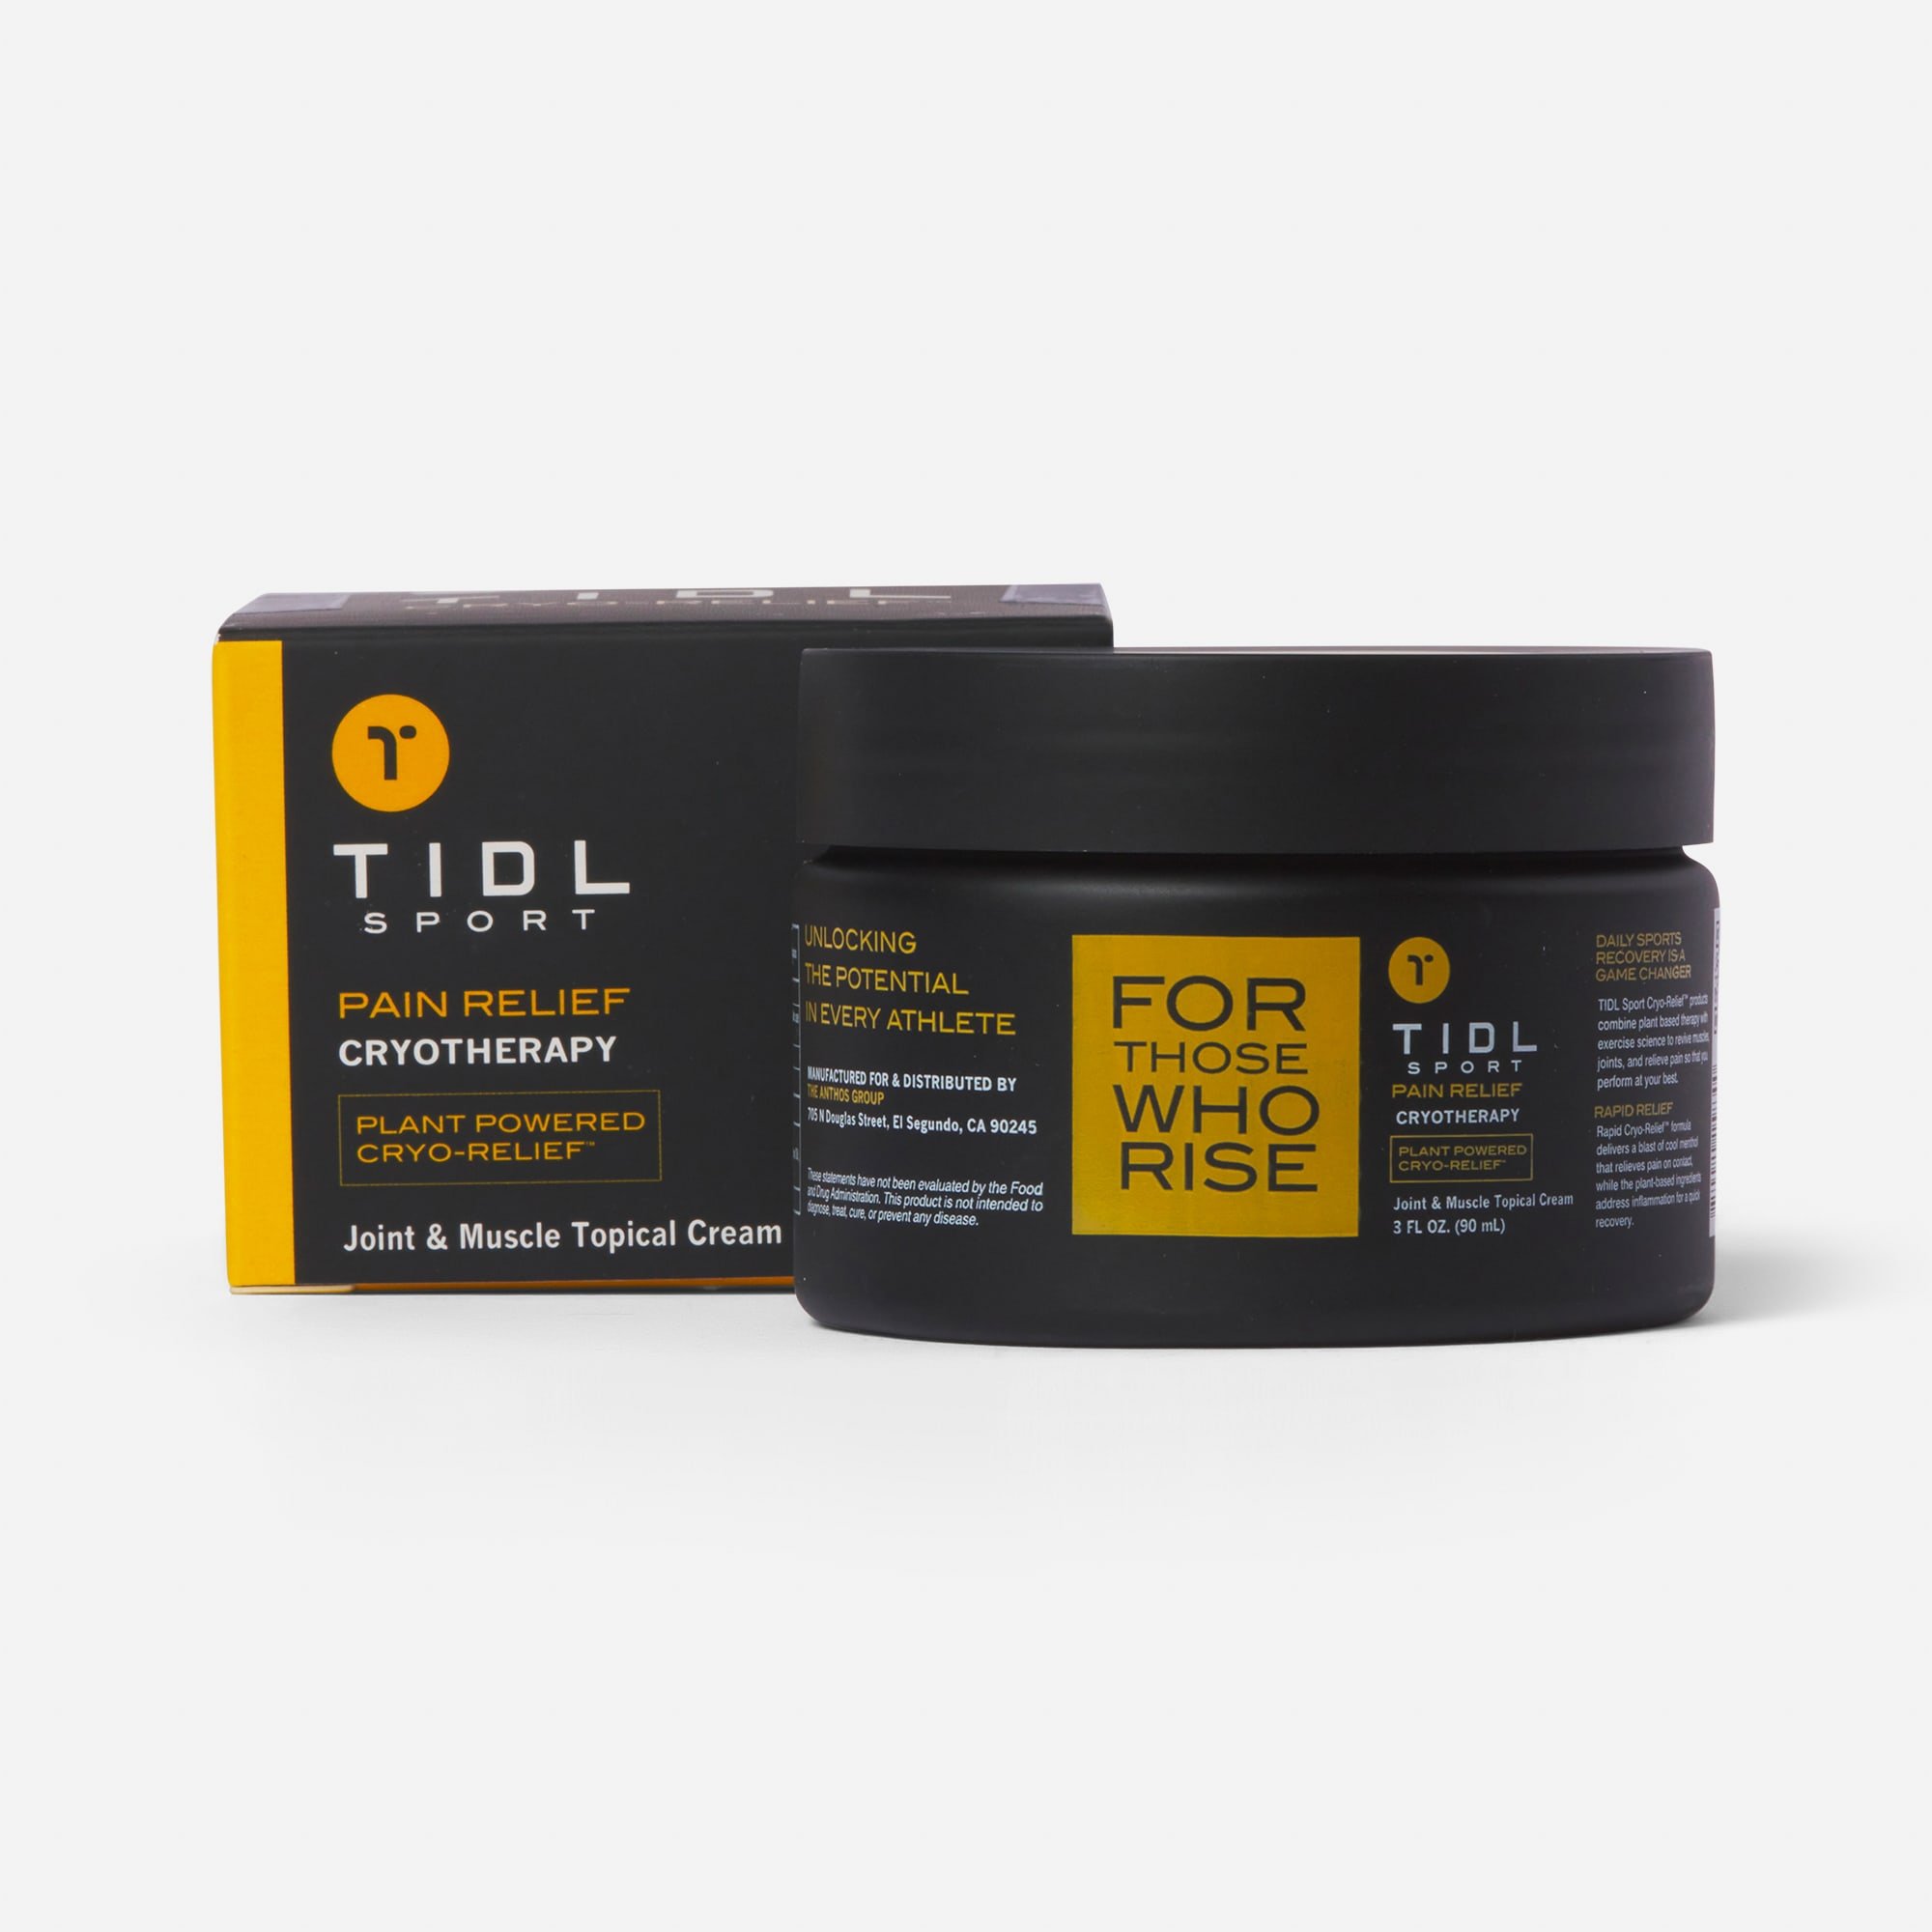 TIDL Sport Pain Relief Cryotherapy Topical Cream